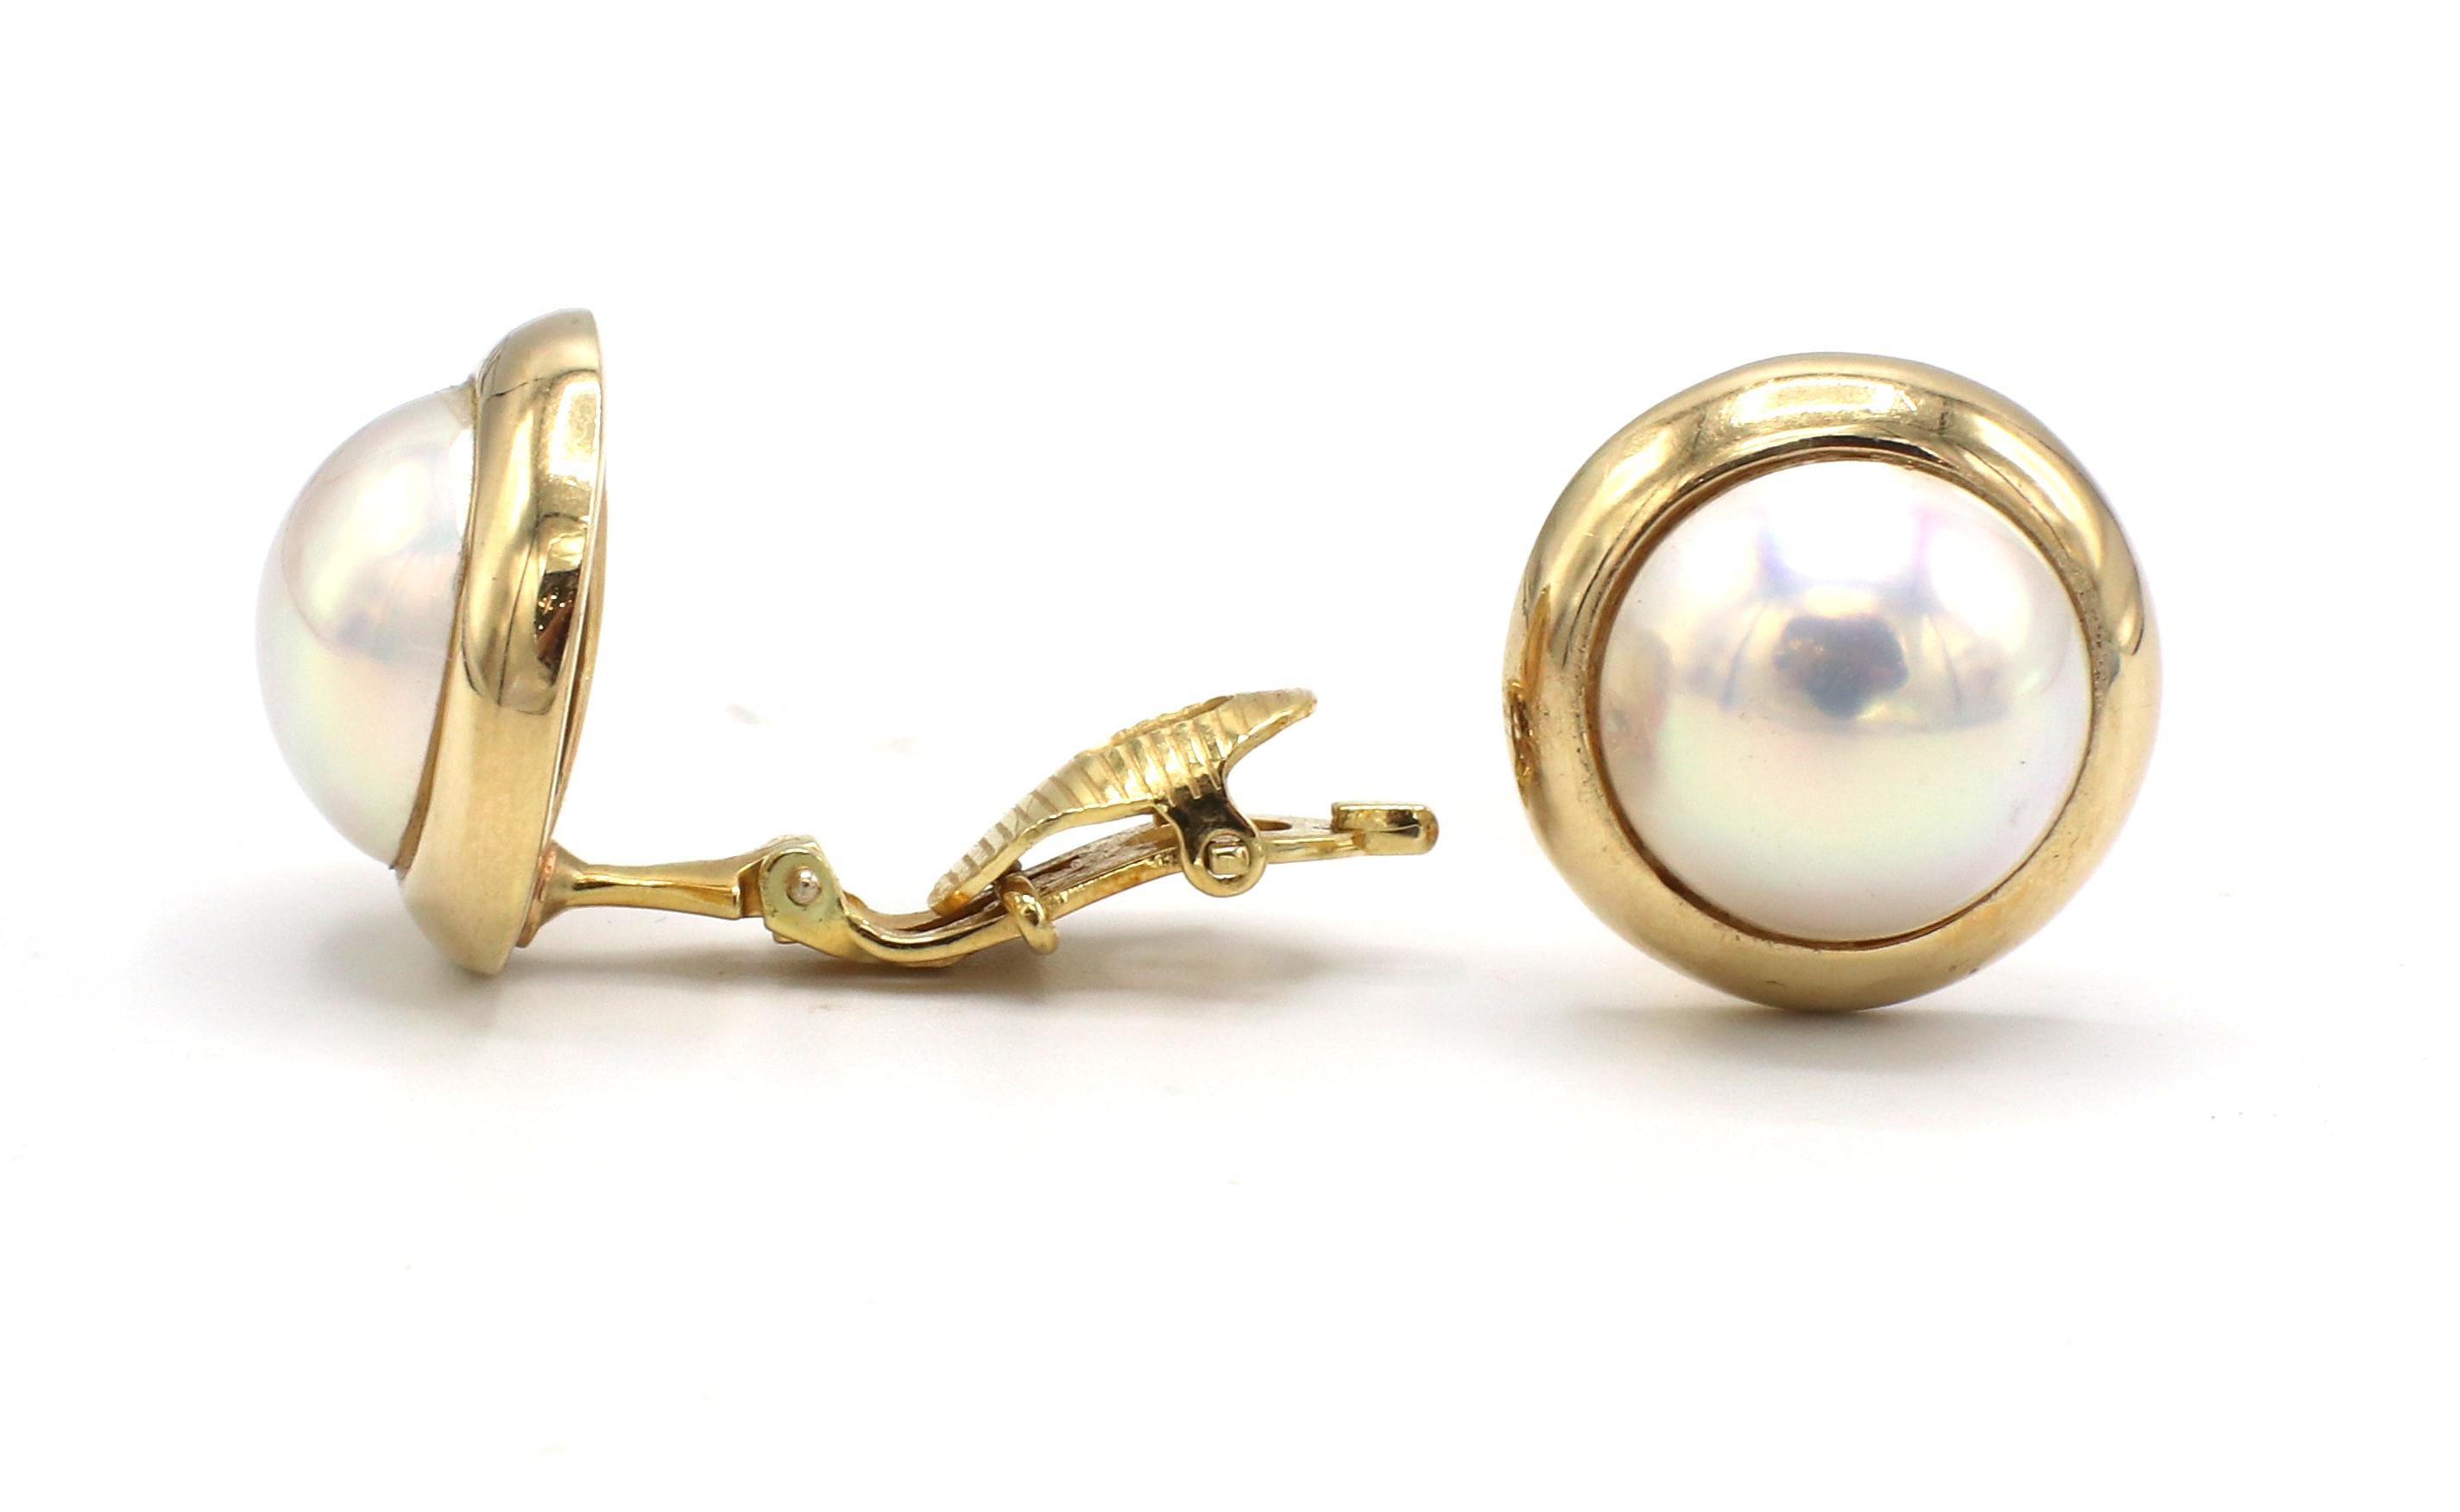 Tiffany & Co. Yellow Gold Mabe Pearl Dome Lever Back Earrings 
Metal: 14k & 18k yellow gold 
Weight: 12.55 grams
Diameter: 18mm
Pearls: 13mm diameter, 9mm height
Backs: Lever backs, (no post)

